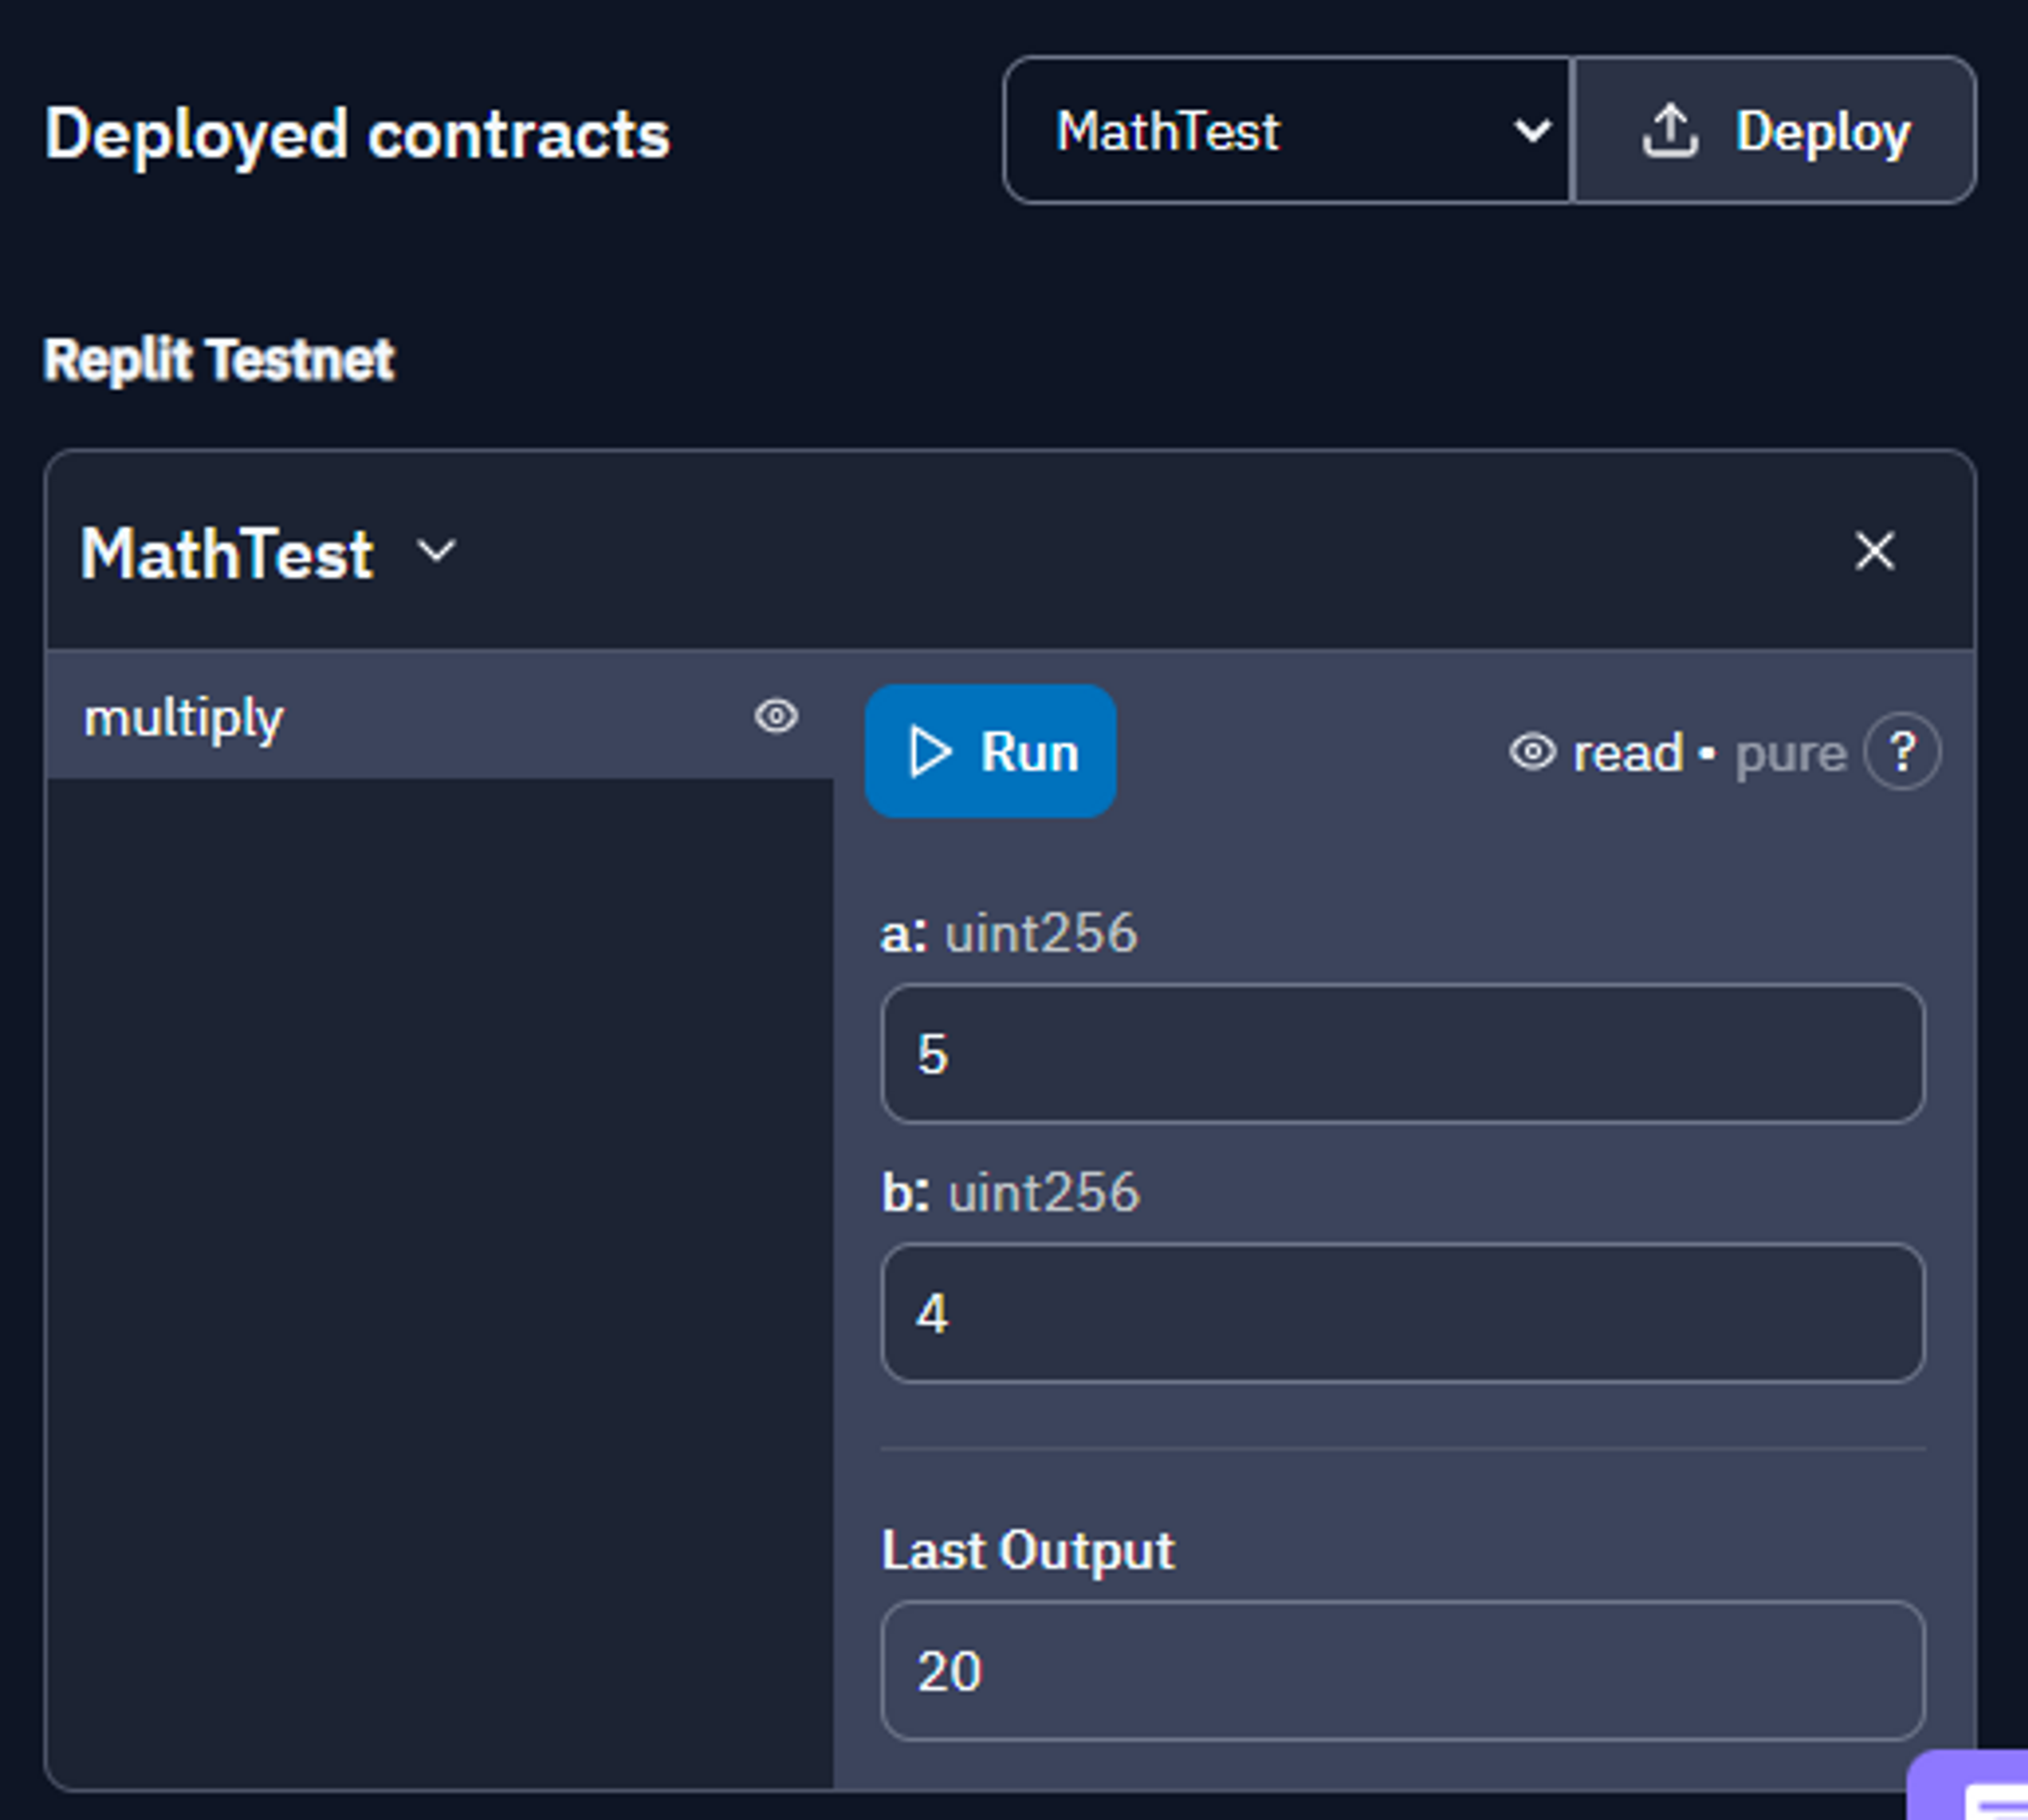 Deployed MathTest contract